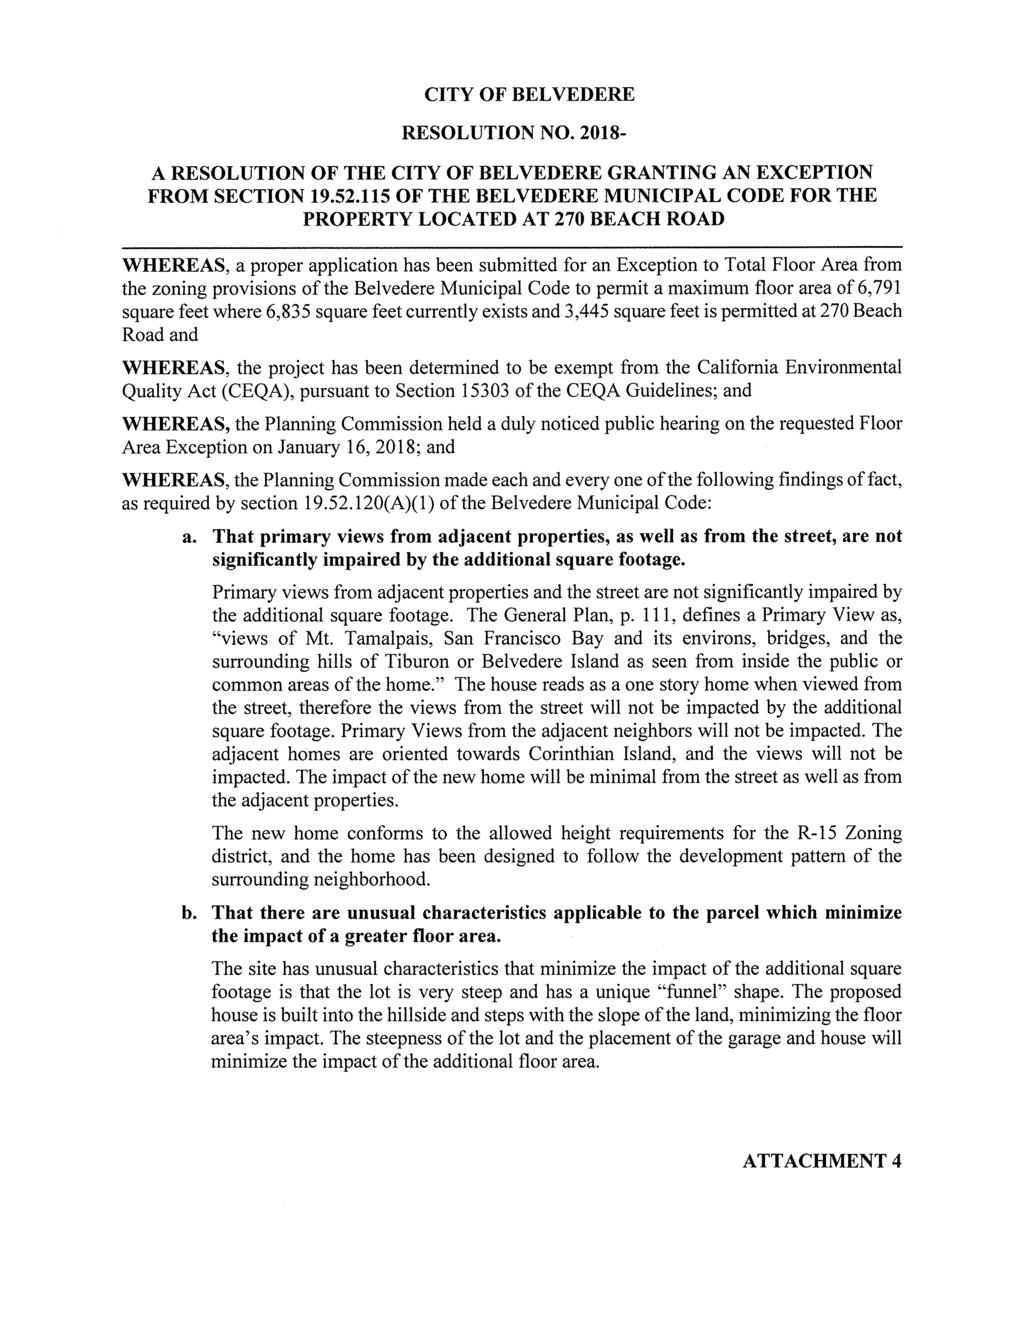 CITY OF BELVEDERE RESOLUTION NO. 2018- A RESOLUTION OF THE CITY OF BELVEDERE GRANTING AN EXCEPTION FROM SECTION 19.52.